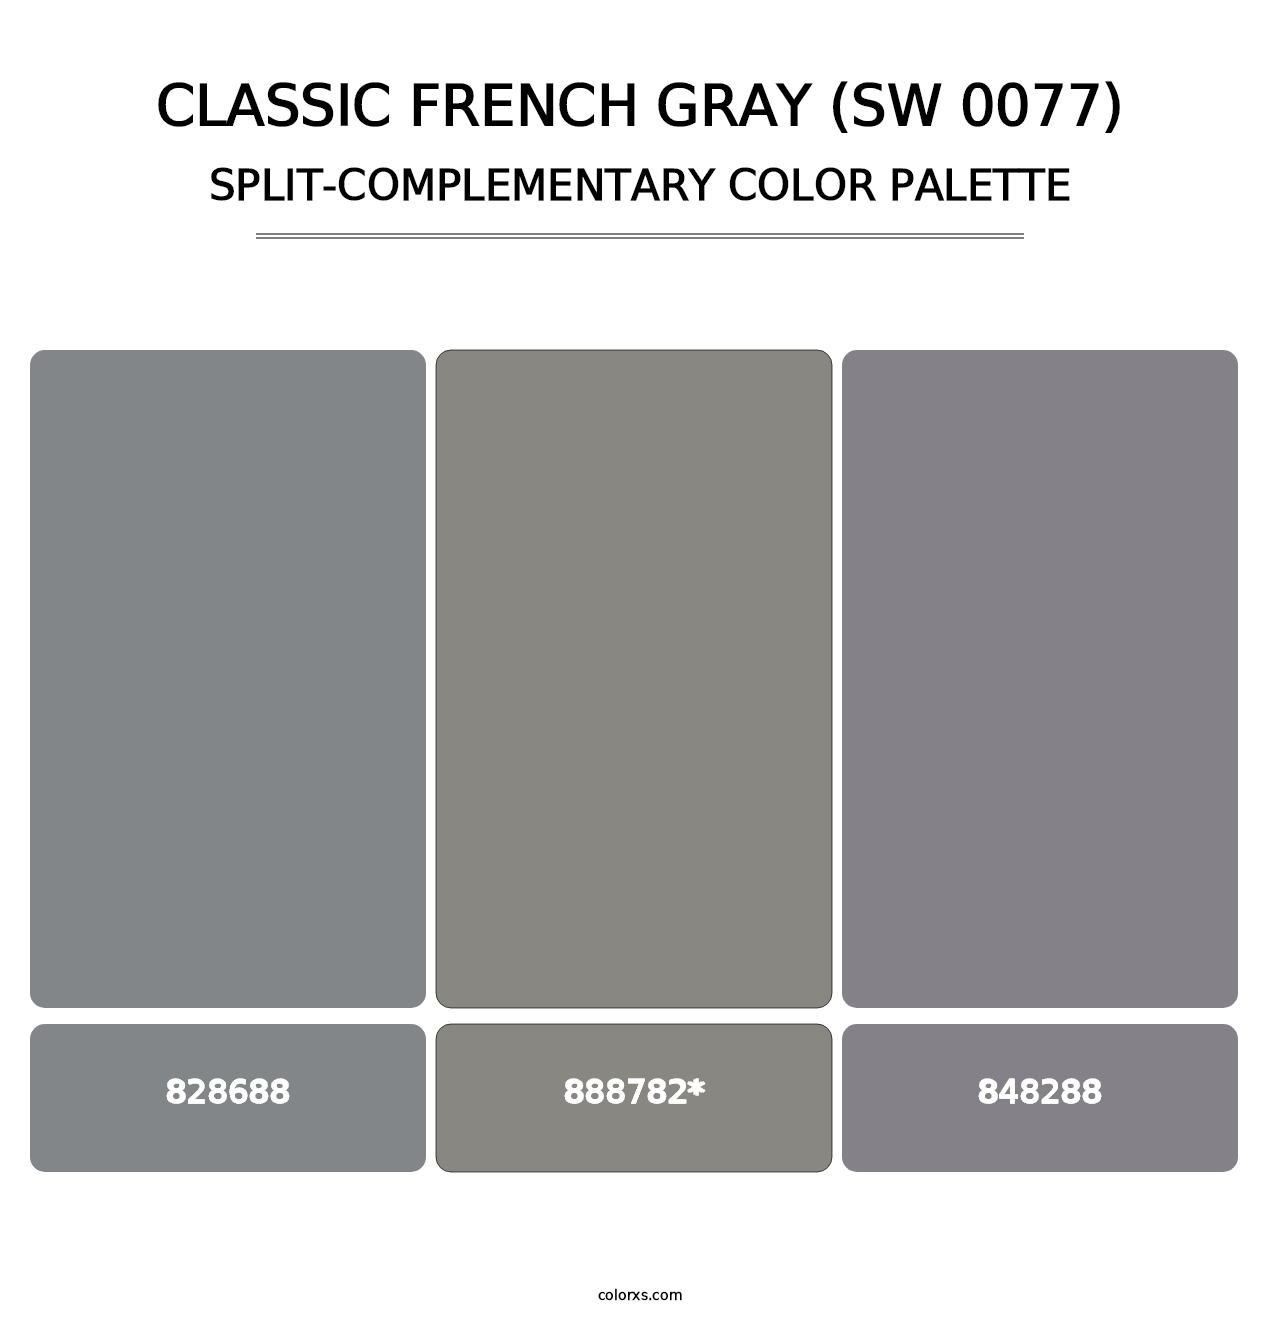 Classic French Gray (SW 0077) - Split-Complementary Color Palette